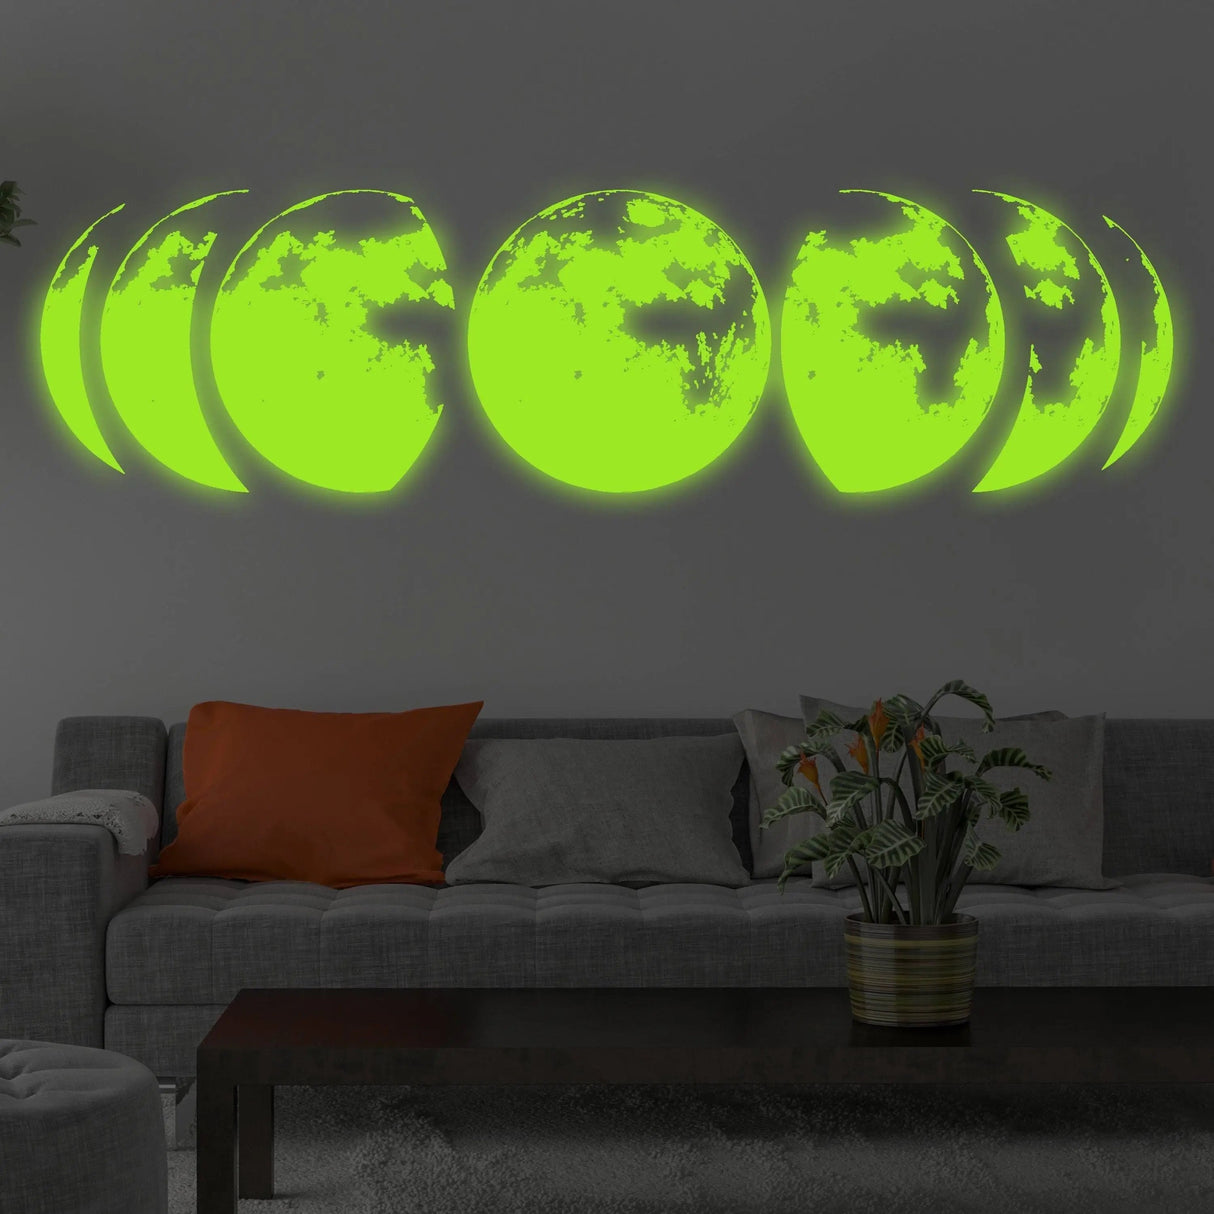 Glow in Dark Moon Phases Wall Decor Decal - Night Light Art Living Room Sticker - Glowing Neon Phase Cycle Nursery Lunar Crescent Mural - 94 x 20